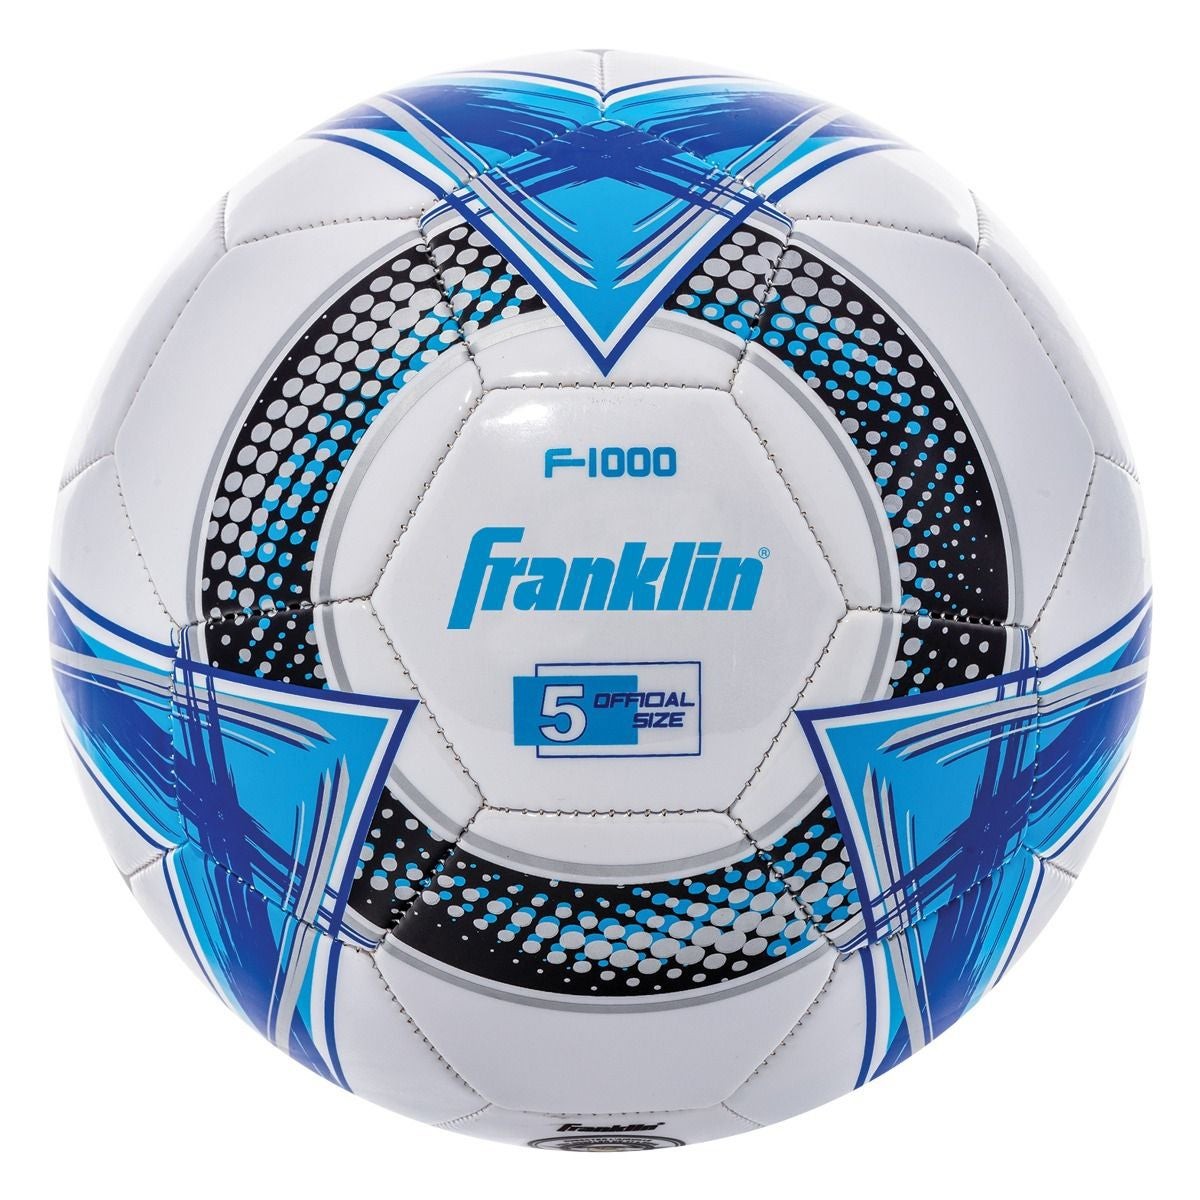 Field Master Competition F-1000 Soccer Ball Size 5